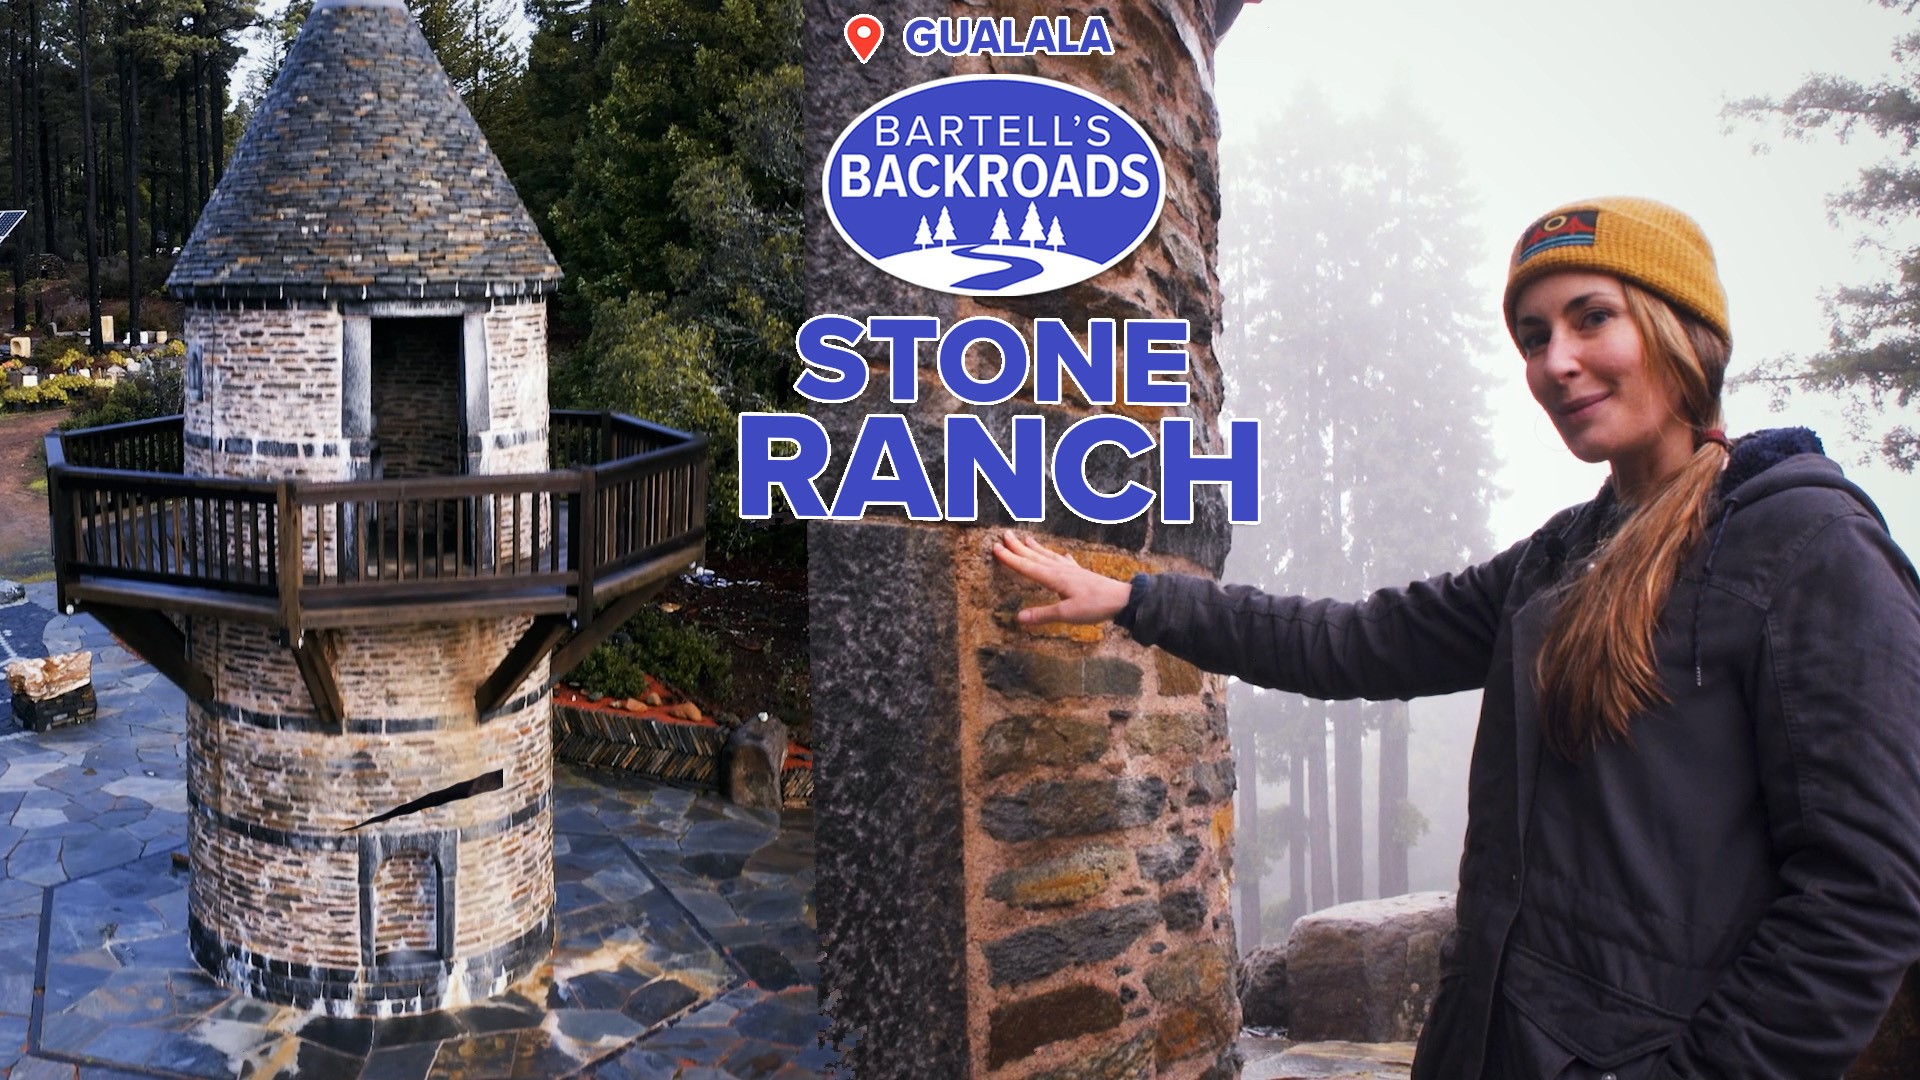 Tour the miraculous rock installations at the Mendocino Stone Ranch.